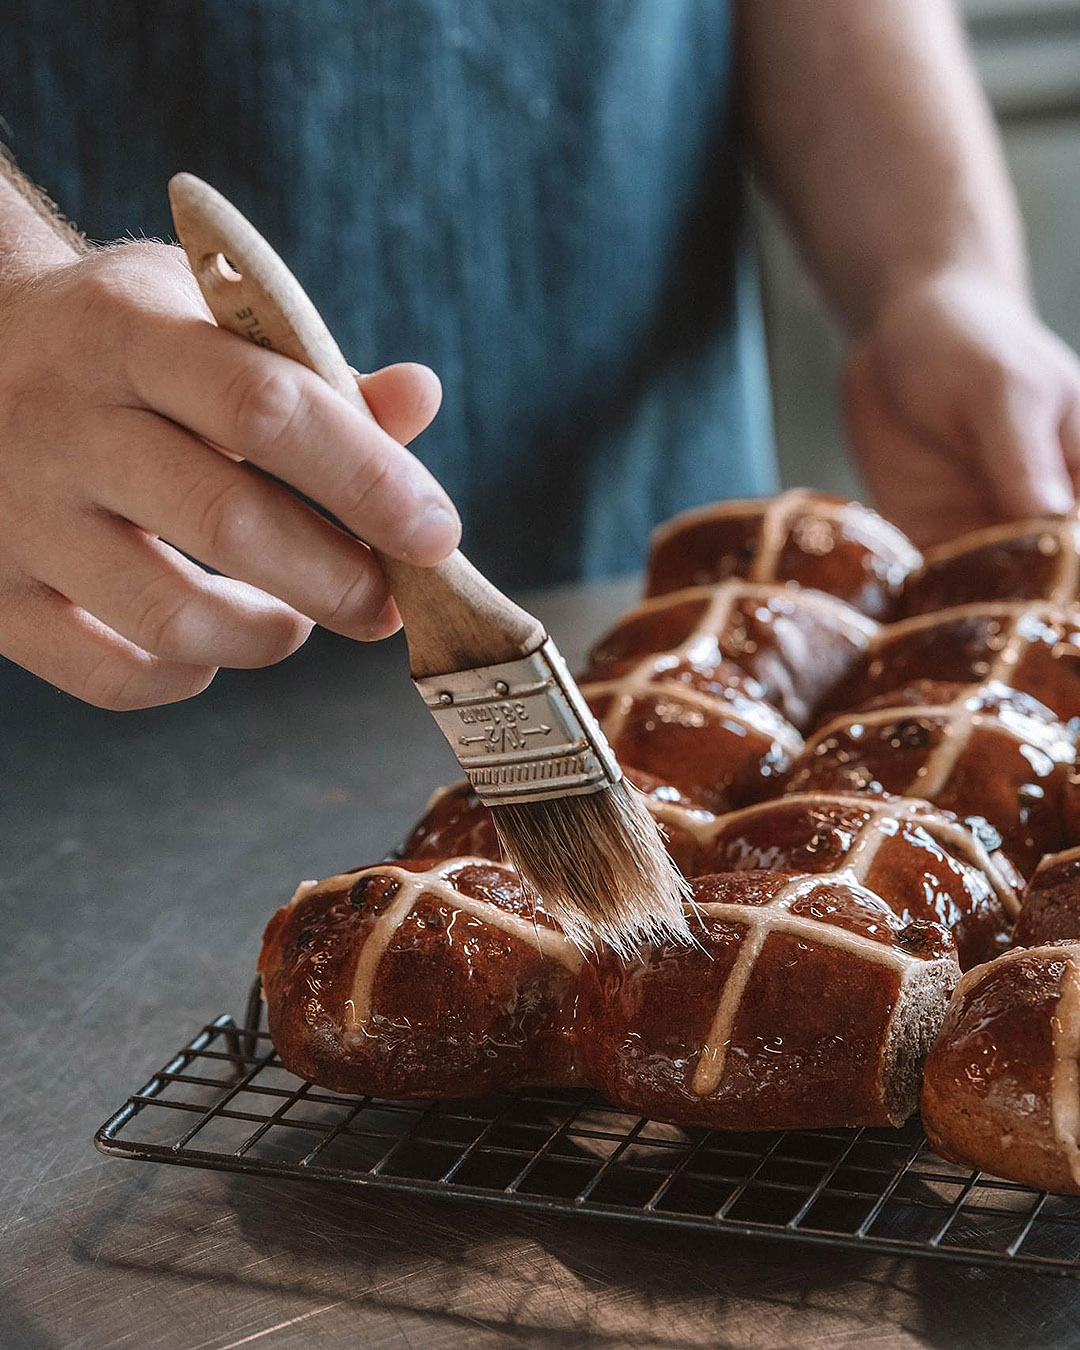 Someone glazes delicious looking hot cross buns.